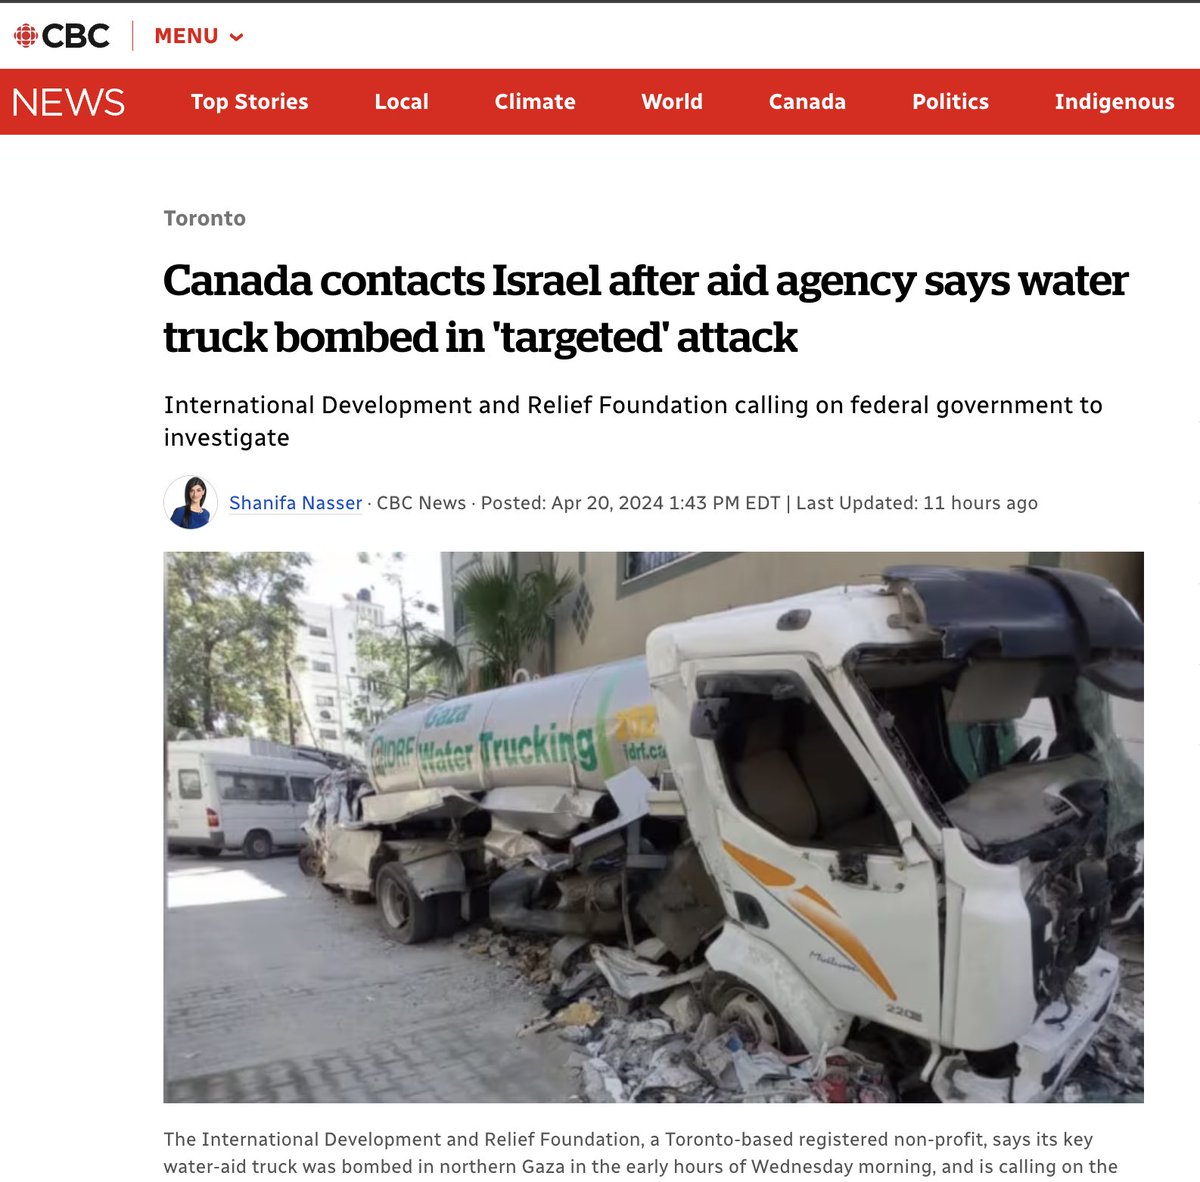 🚨Israel surgically bombs another international humanitarian aid truck Israel's war crimes manual: commit a crime so insane & egregious, deny & obscure responsibility. Once you get away with it (like always) & the world gets desensitized, do it over & over again on mass scale...